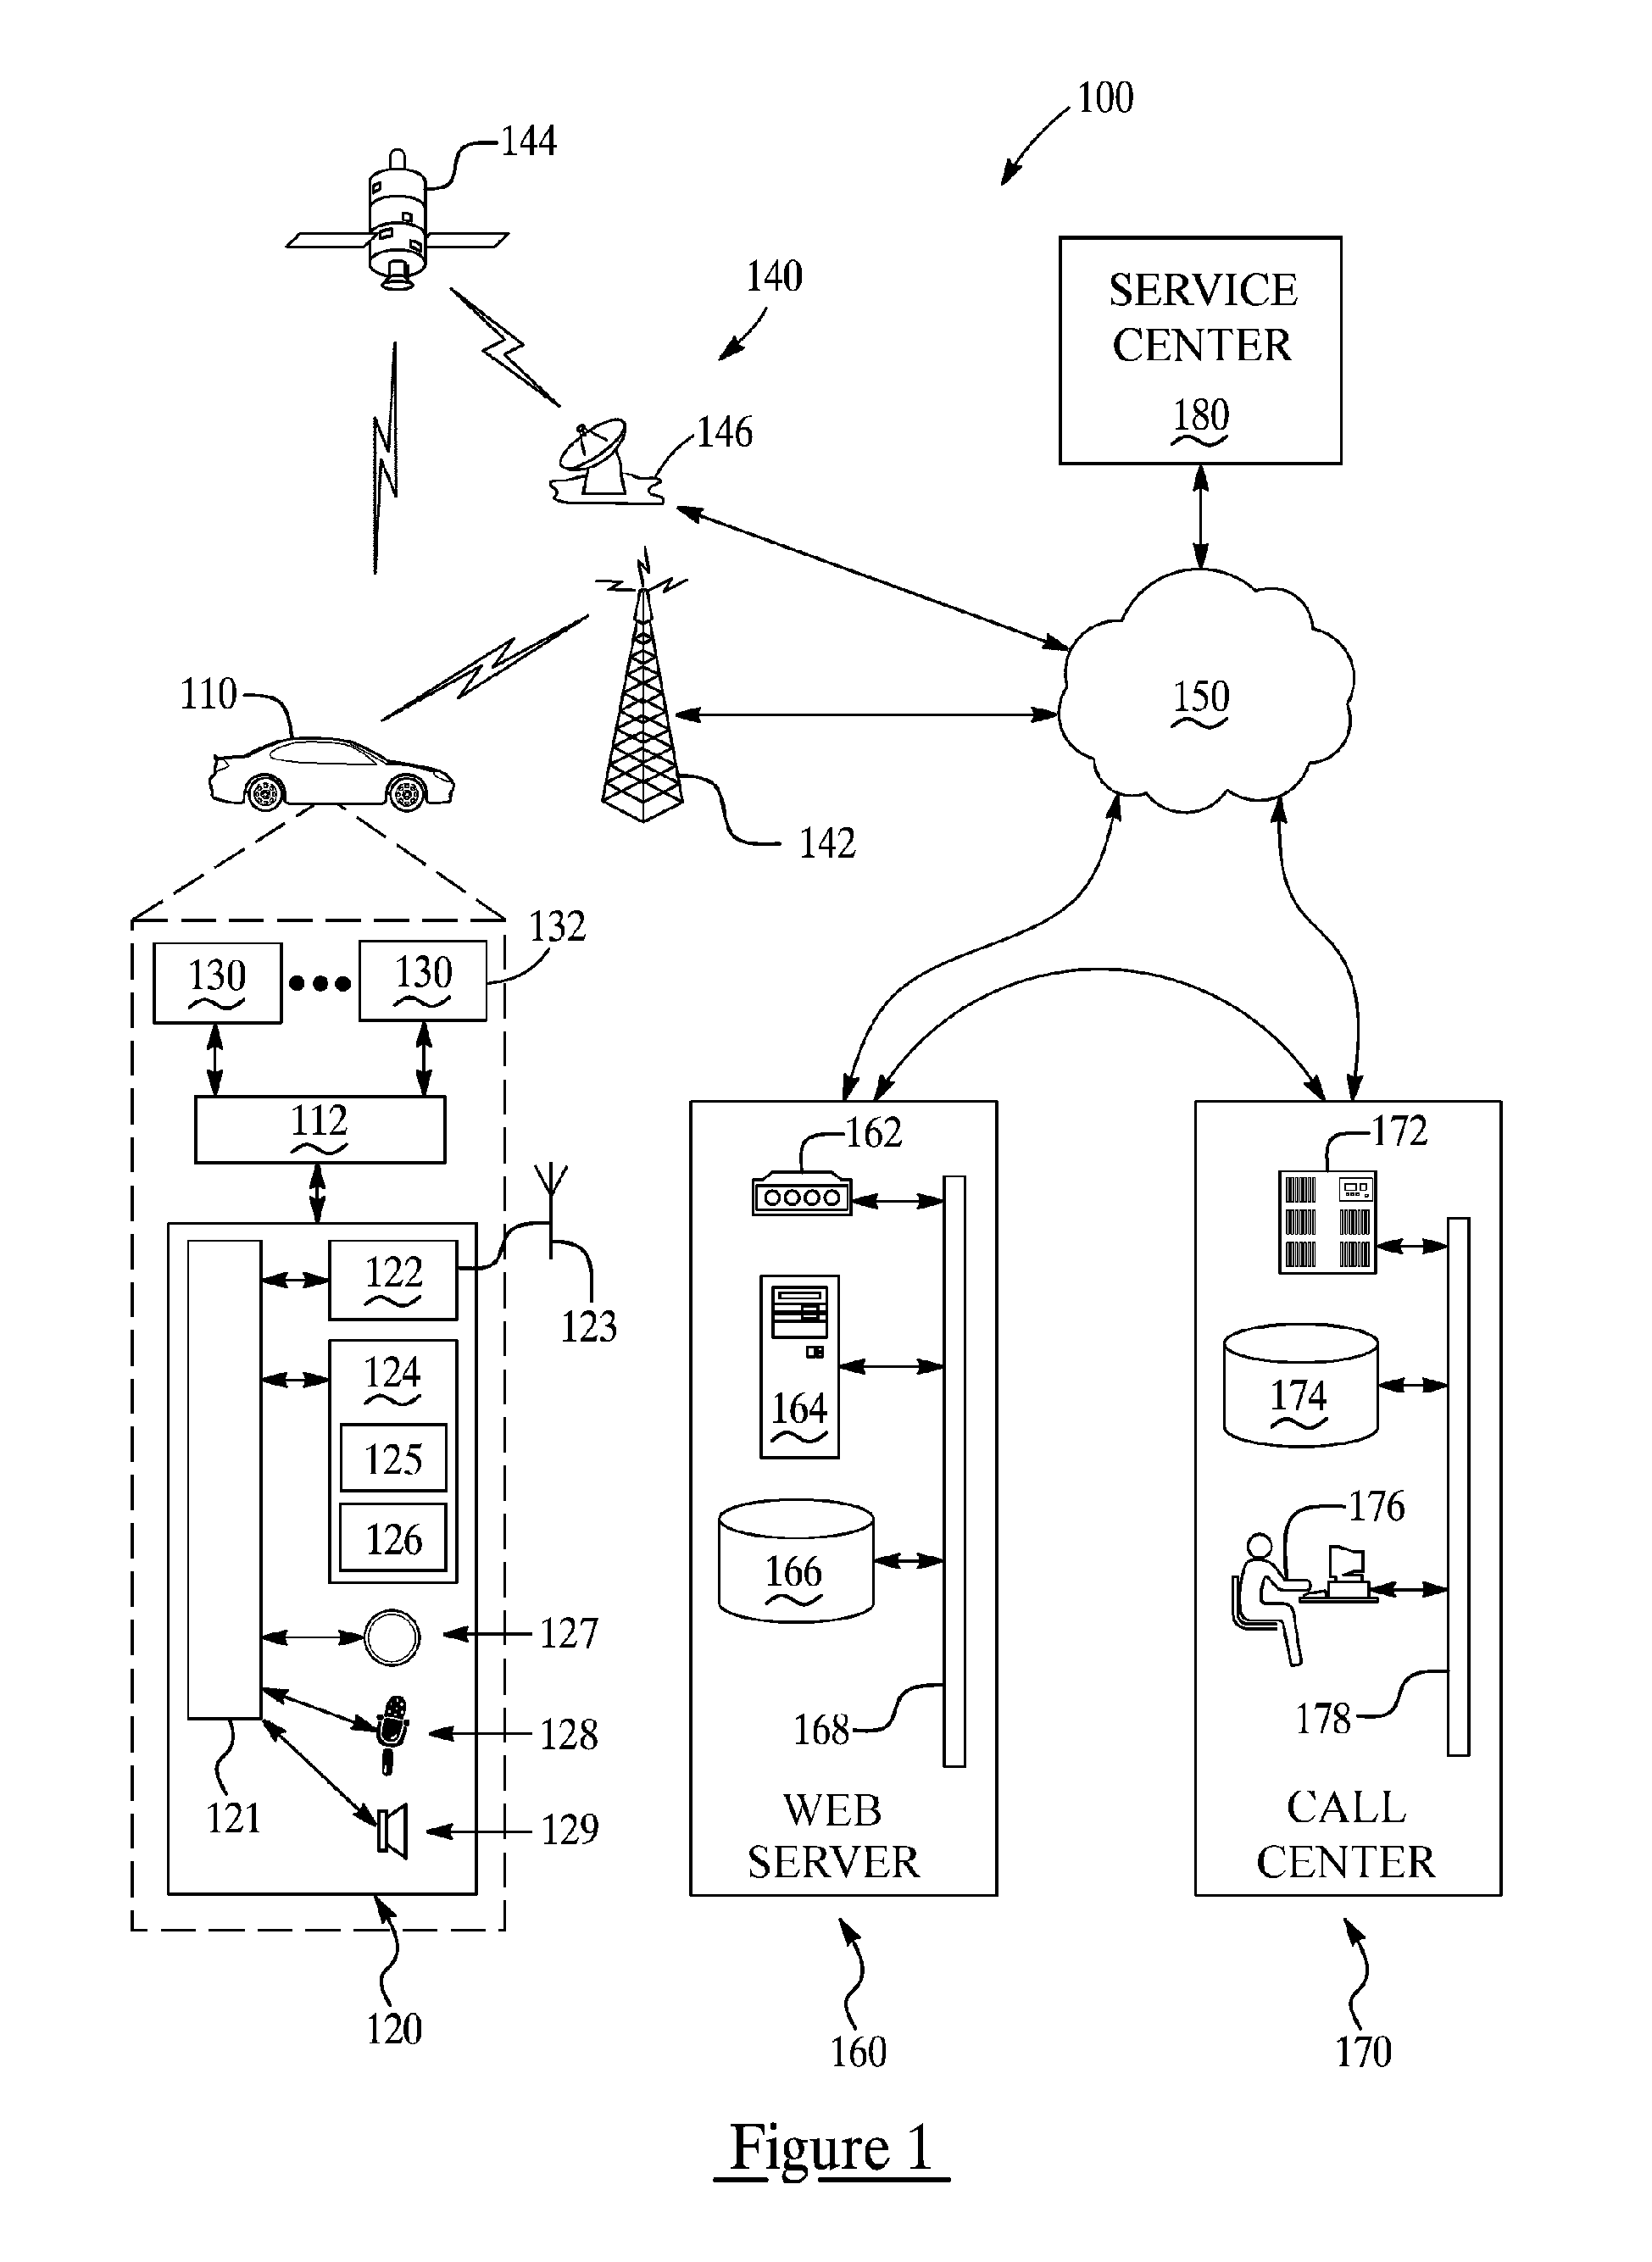 Vehicle diagnostic test and reporting method